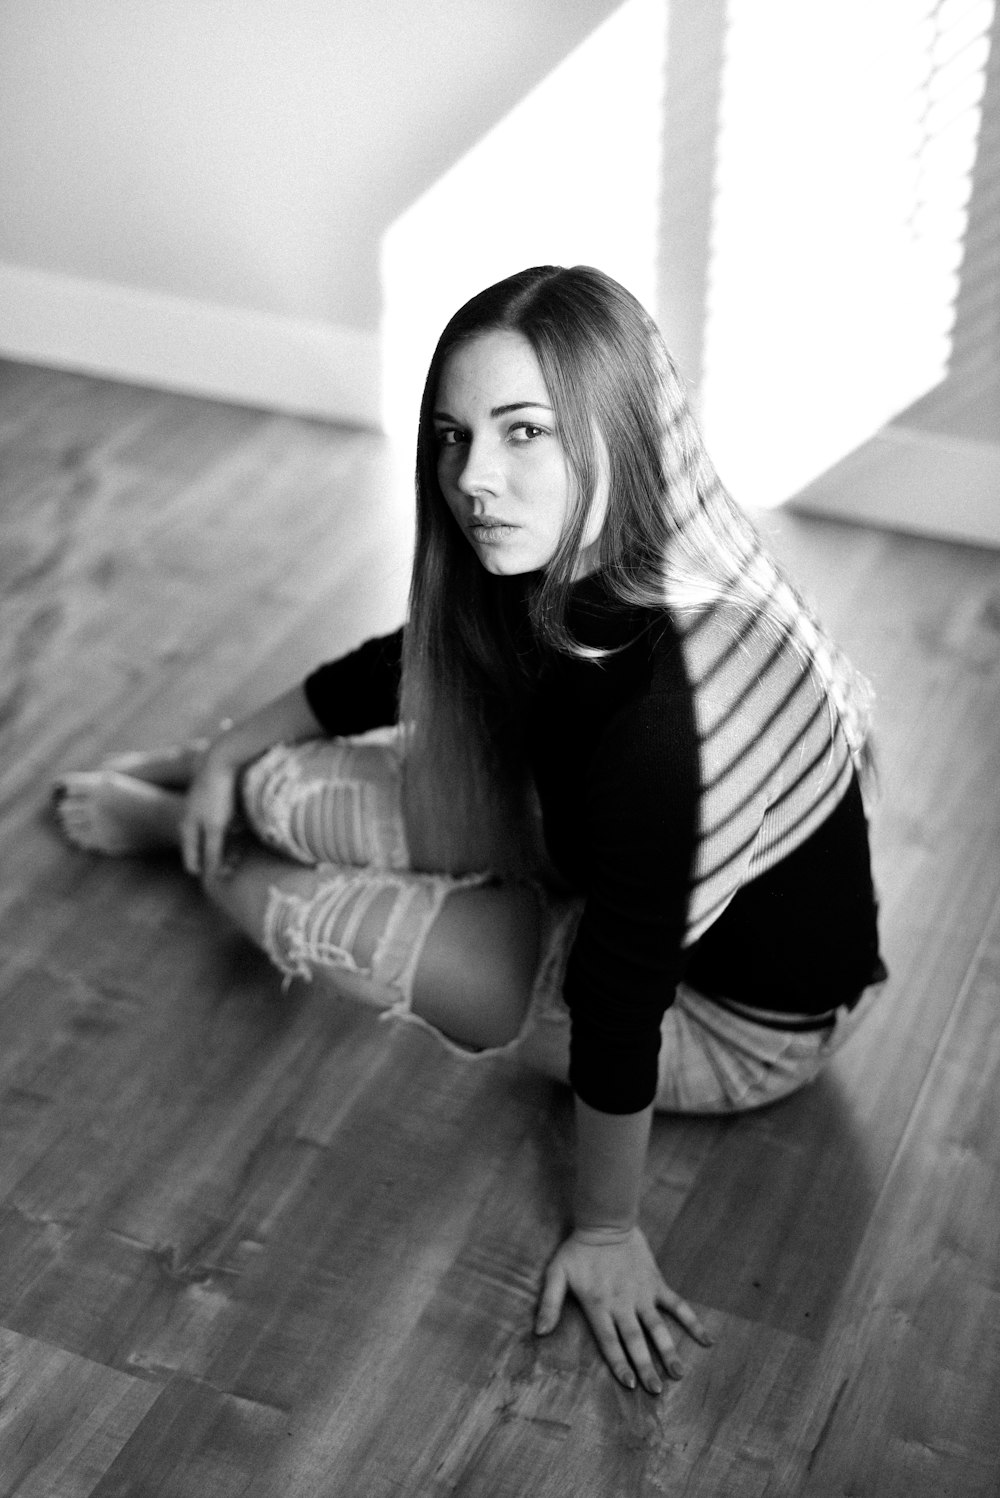 woman in white and black striped long sleeve shirt and black pants sitting on floor